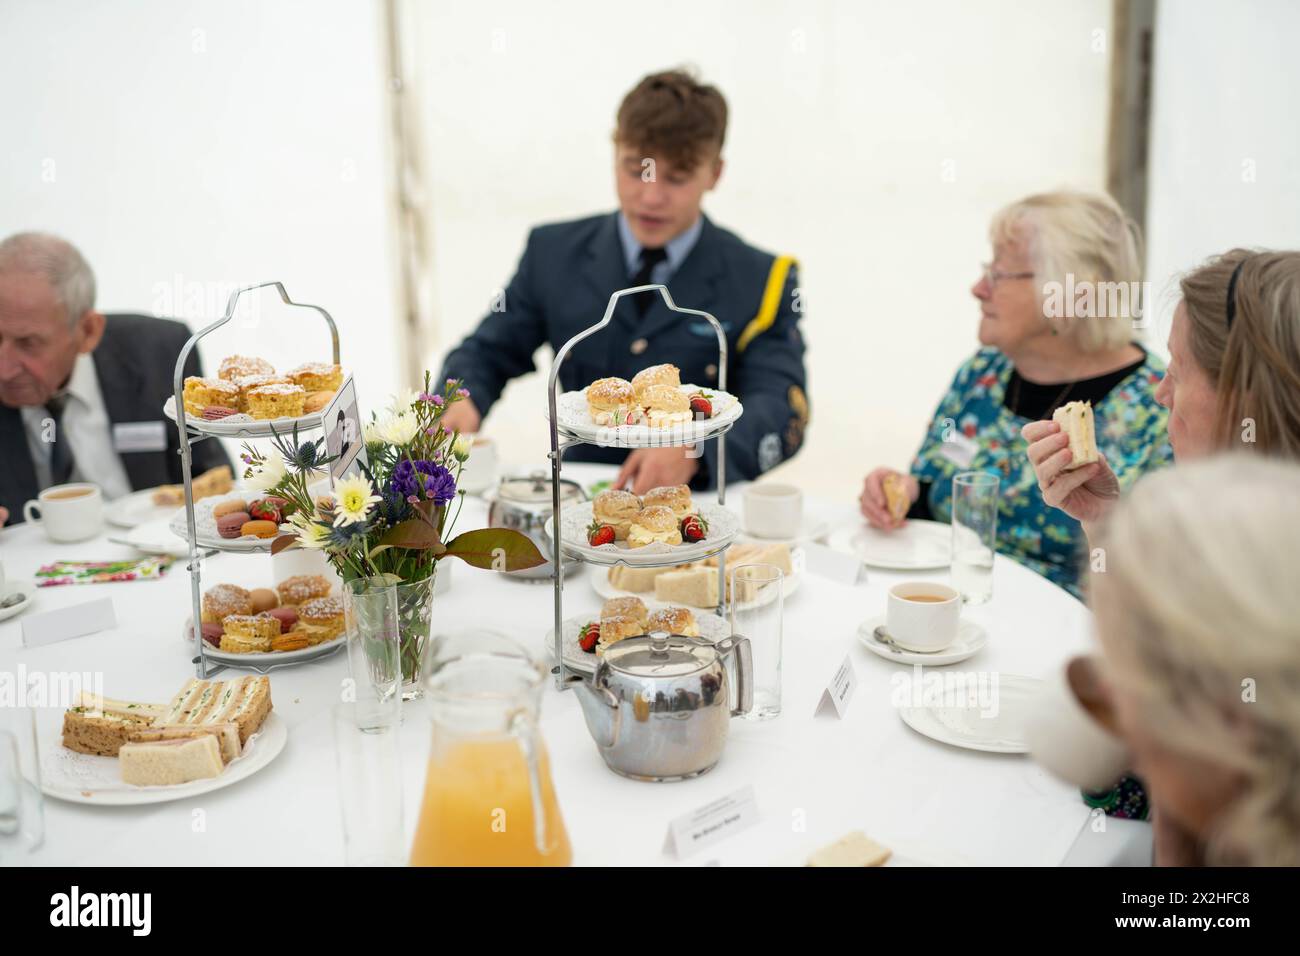 Cakes on cake stand at a tea. Photo date: Tuesday, October 3, 2023. Photo: Richard Gray/Alamy Stock Photo